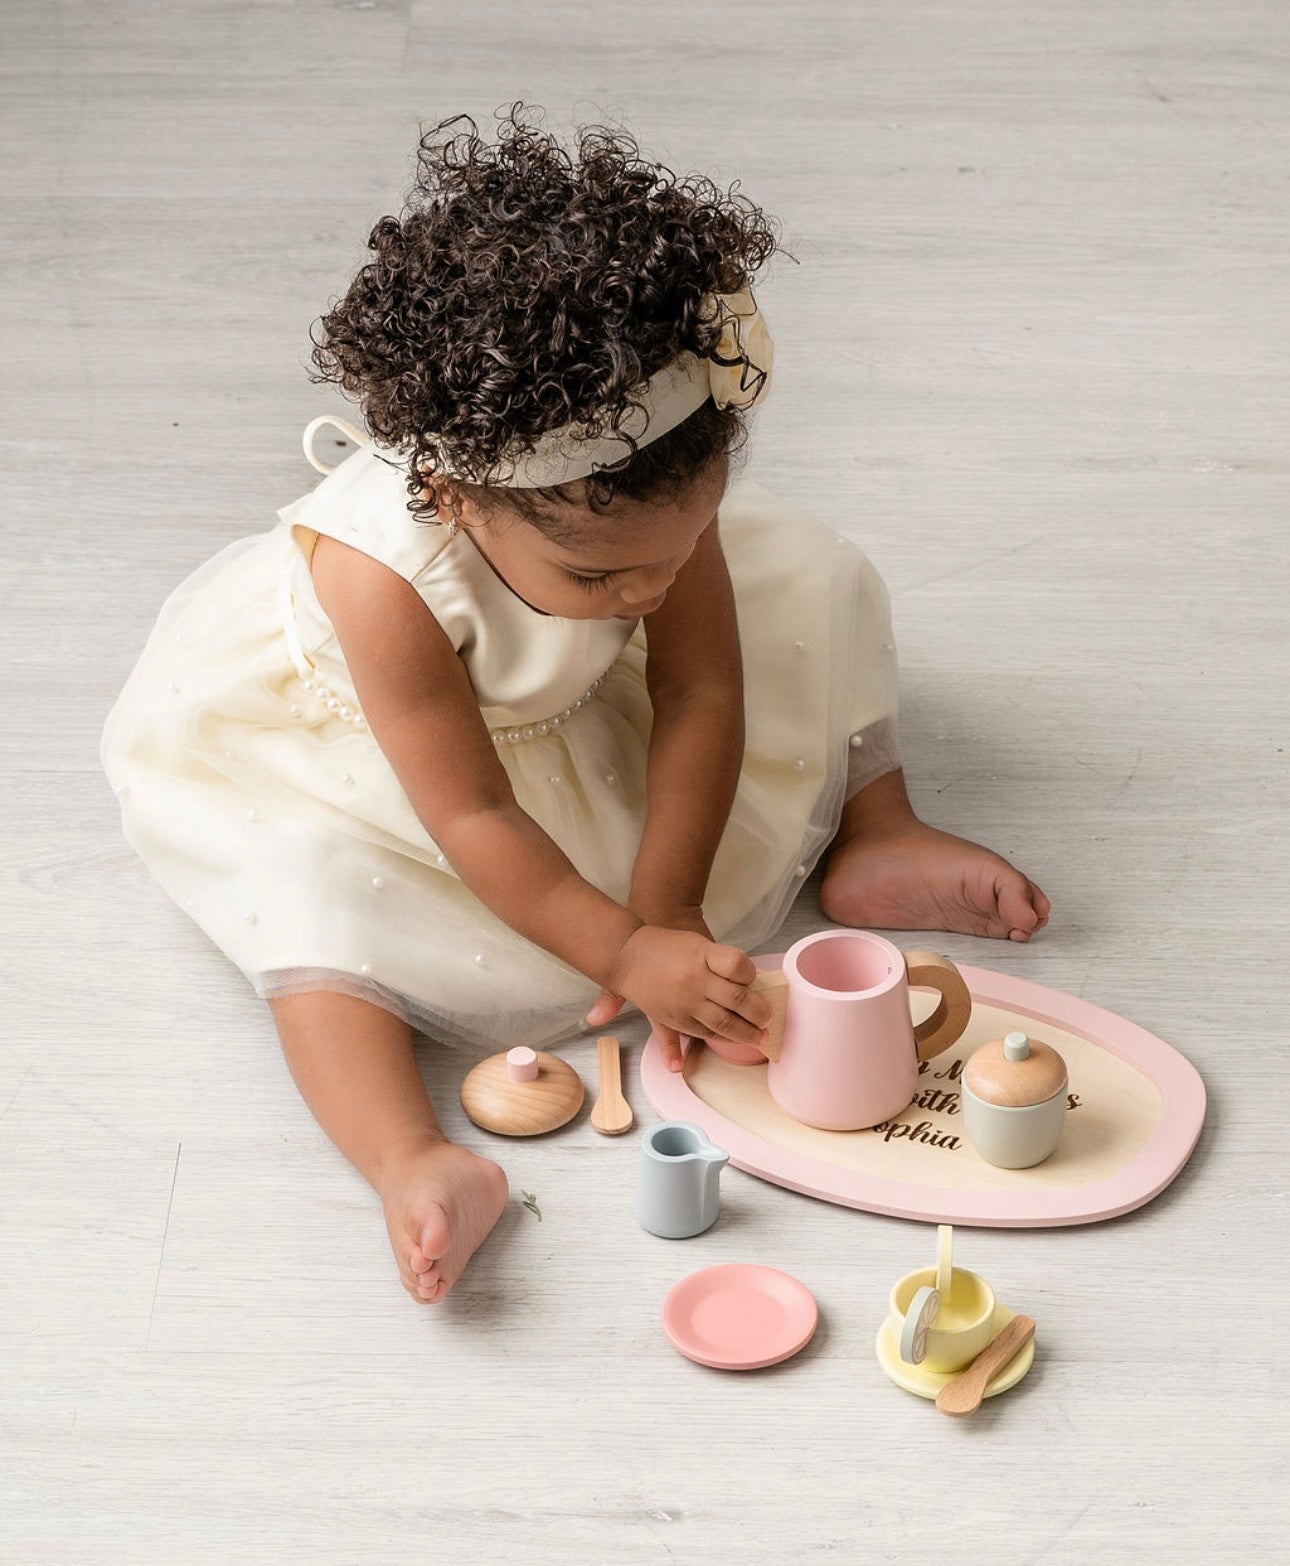 Personalized Toddler Tea Party - Wooden